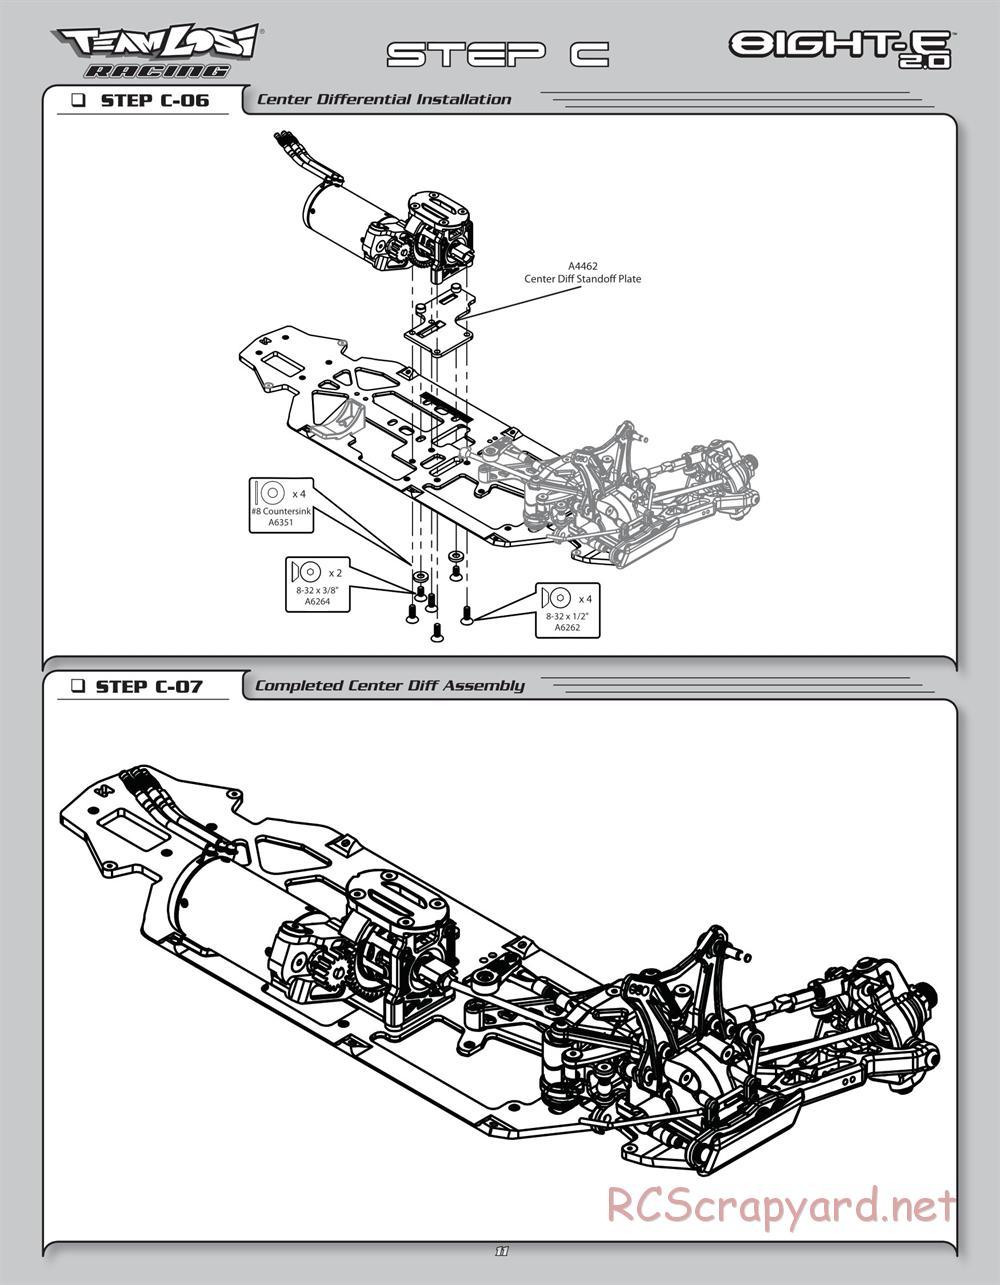 Team Losi - 8ight-E 2.0 Race Roller - Manual - Page 14